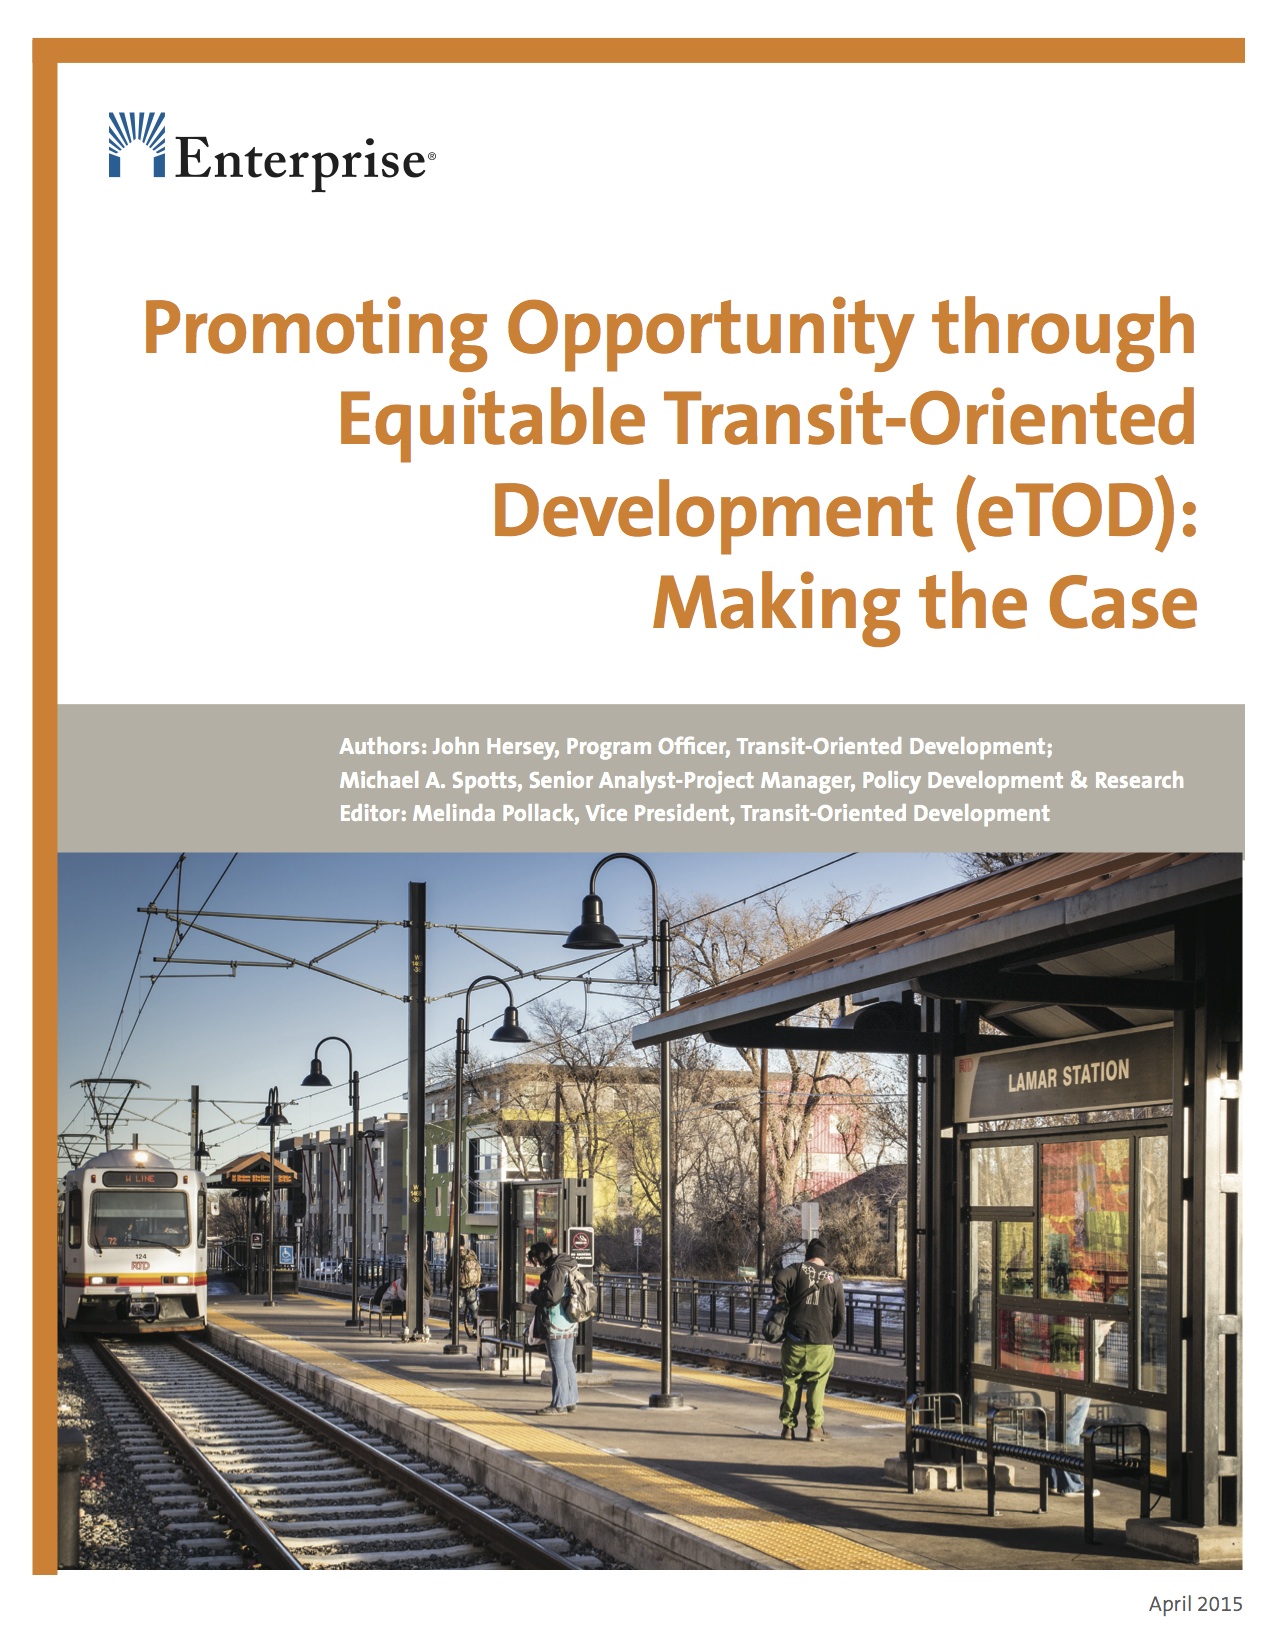 Promoting opportunity through equitable transit-oriented-development (eTOD): Making the case